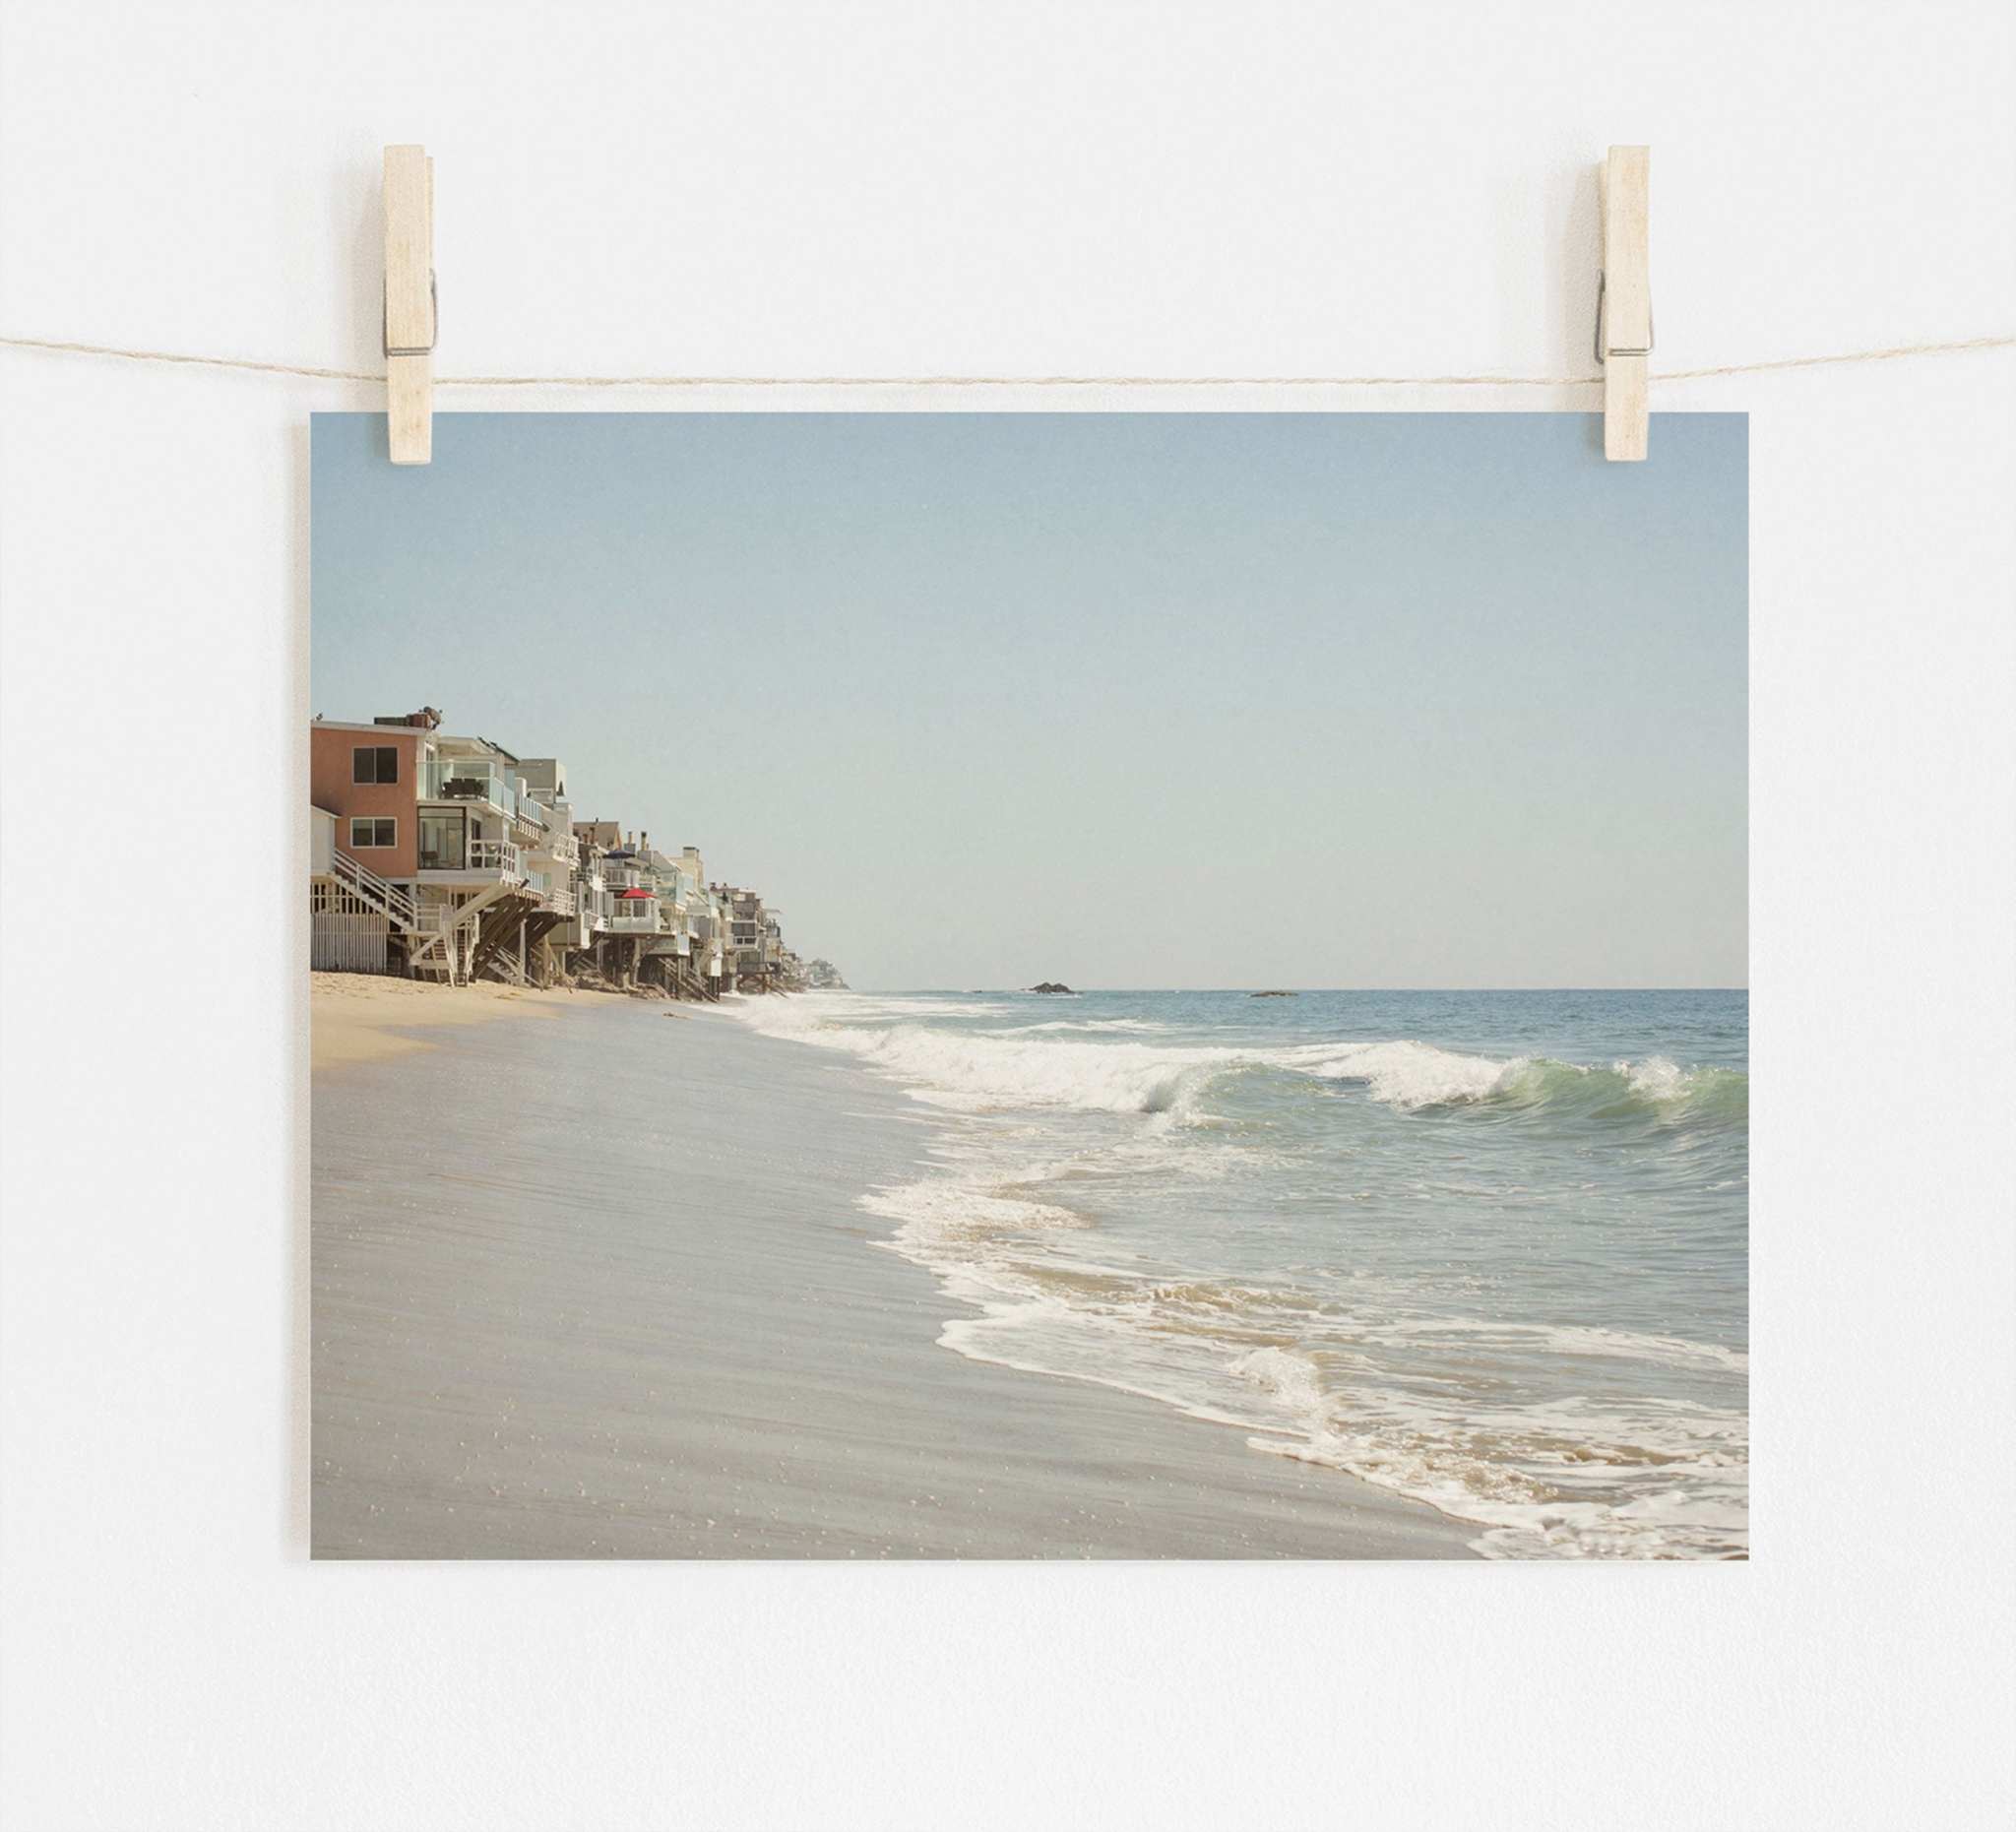 A photograph clipped to a string showing the serene Malibu coastline with waves gently lapping the shore and a row of Offley Green Malibu Beach House Print, &#39;Ocean View&#39; built along a sandy beachfront.